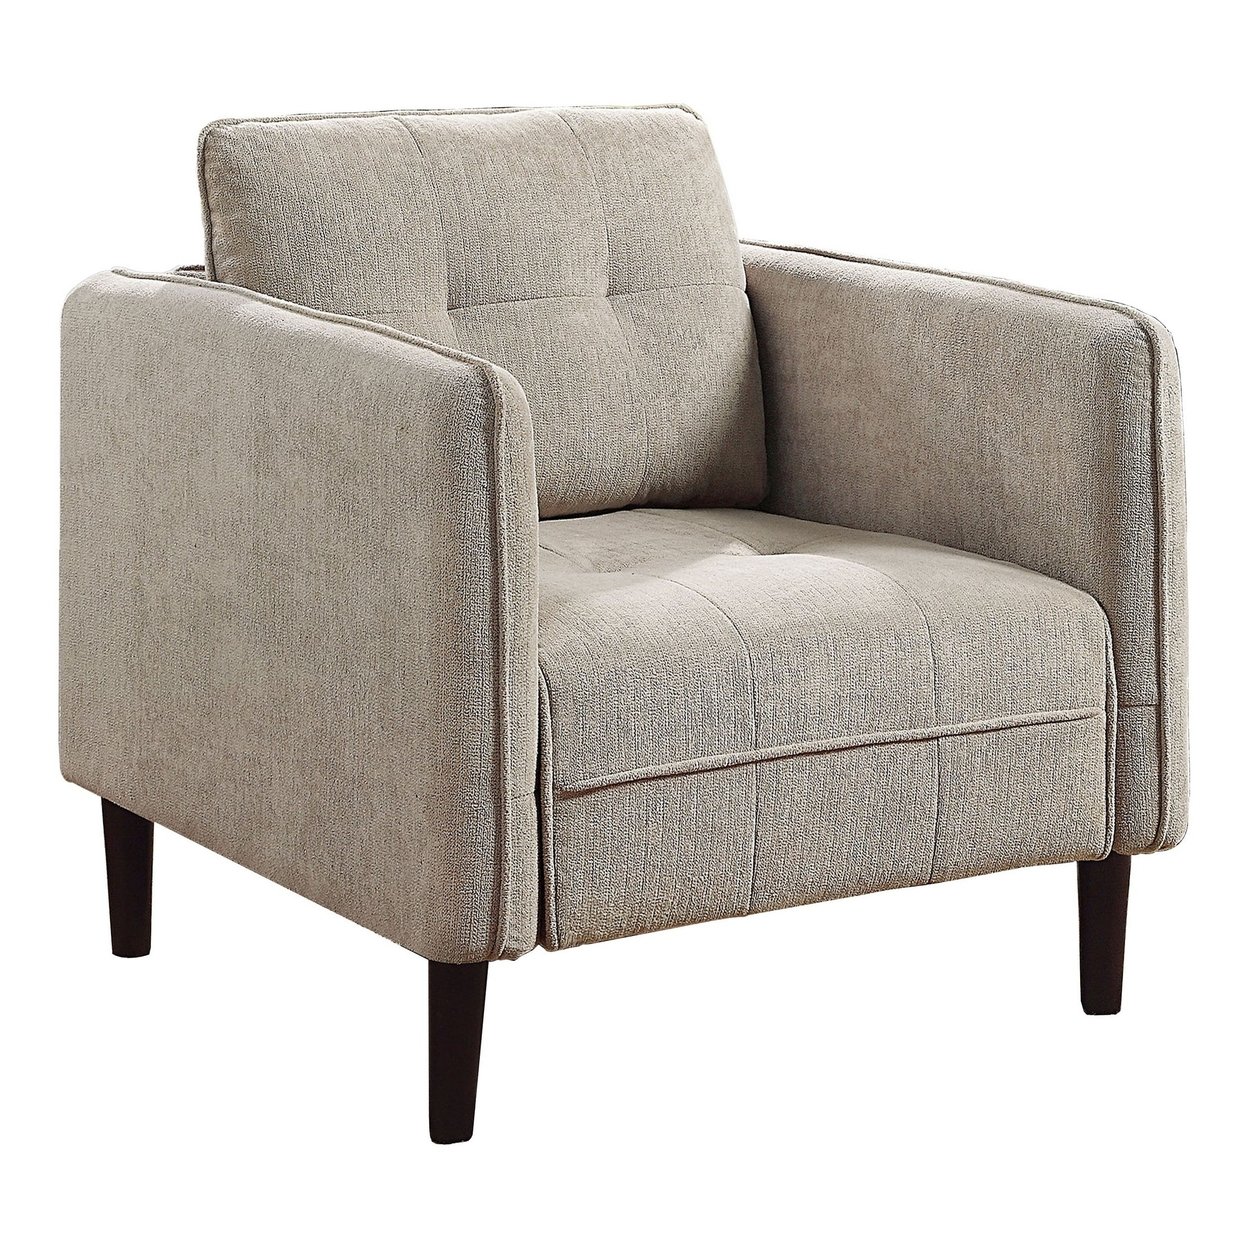 Hak 33 Inch Accent Chair, Rounded Arms, Biscuit Tufting, Wood Legs, Taupe - Saltoro Sherpi